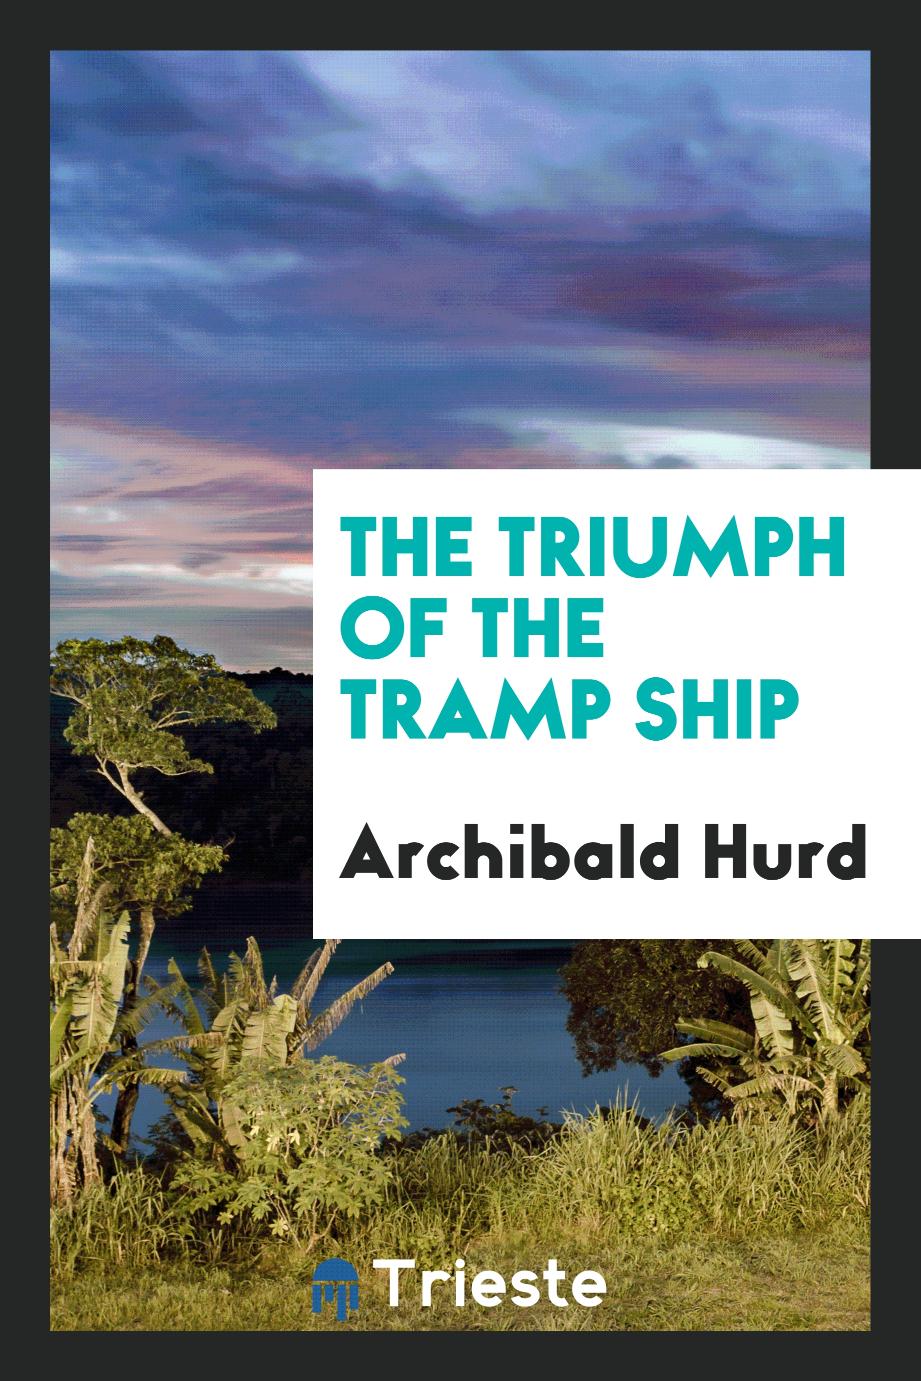 The triumph of the tramp ship